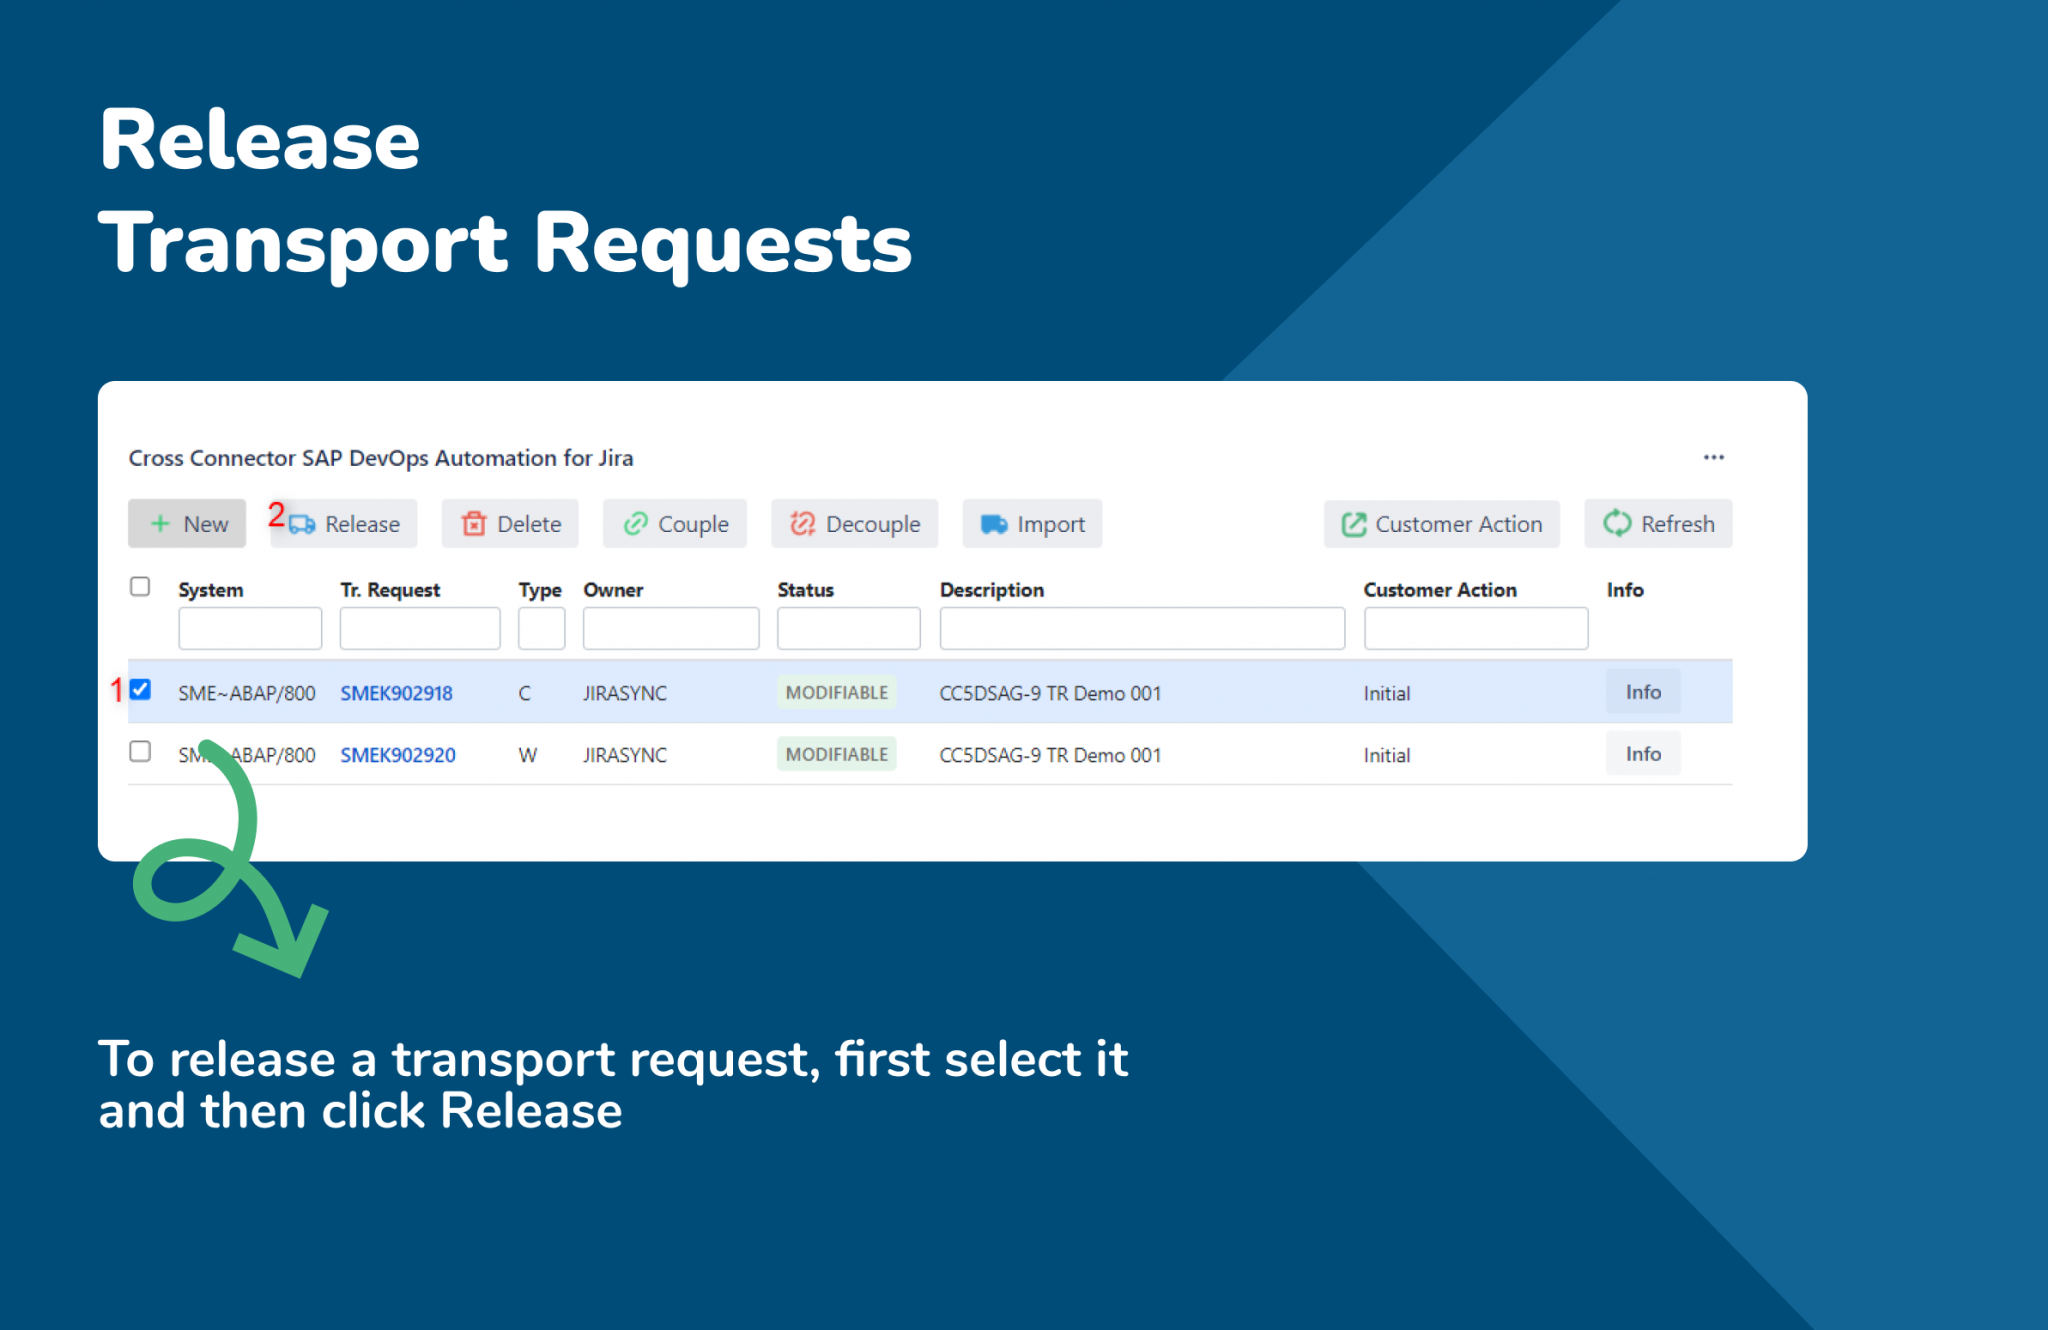 Release Transport Requests